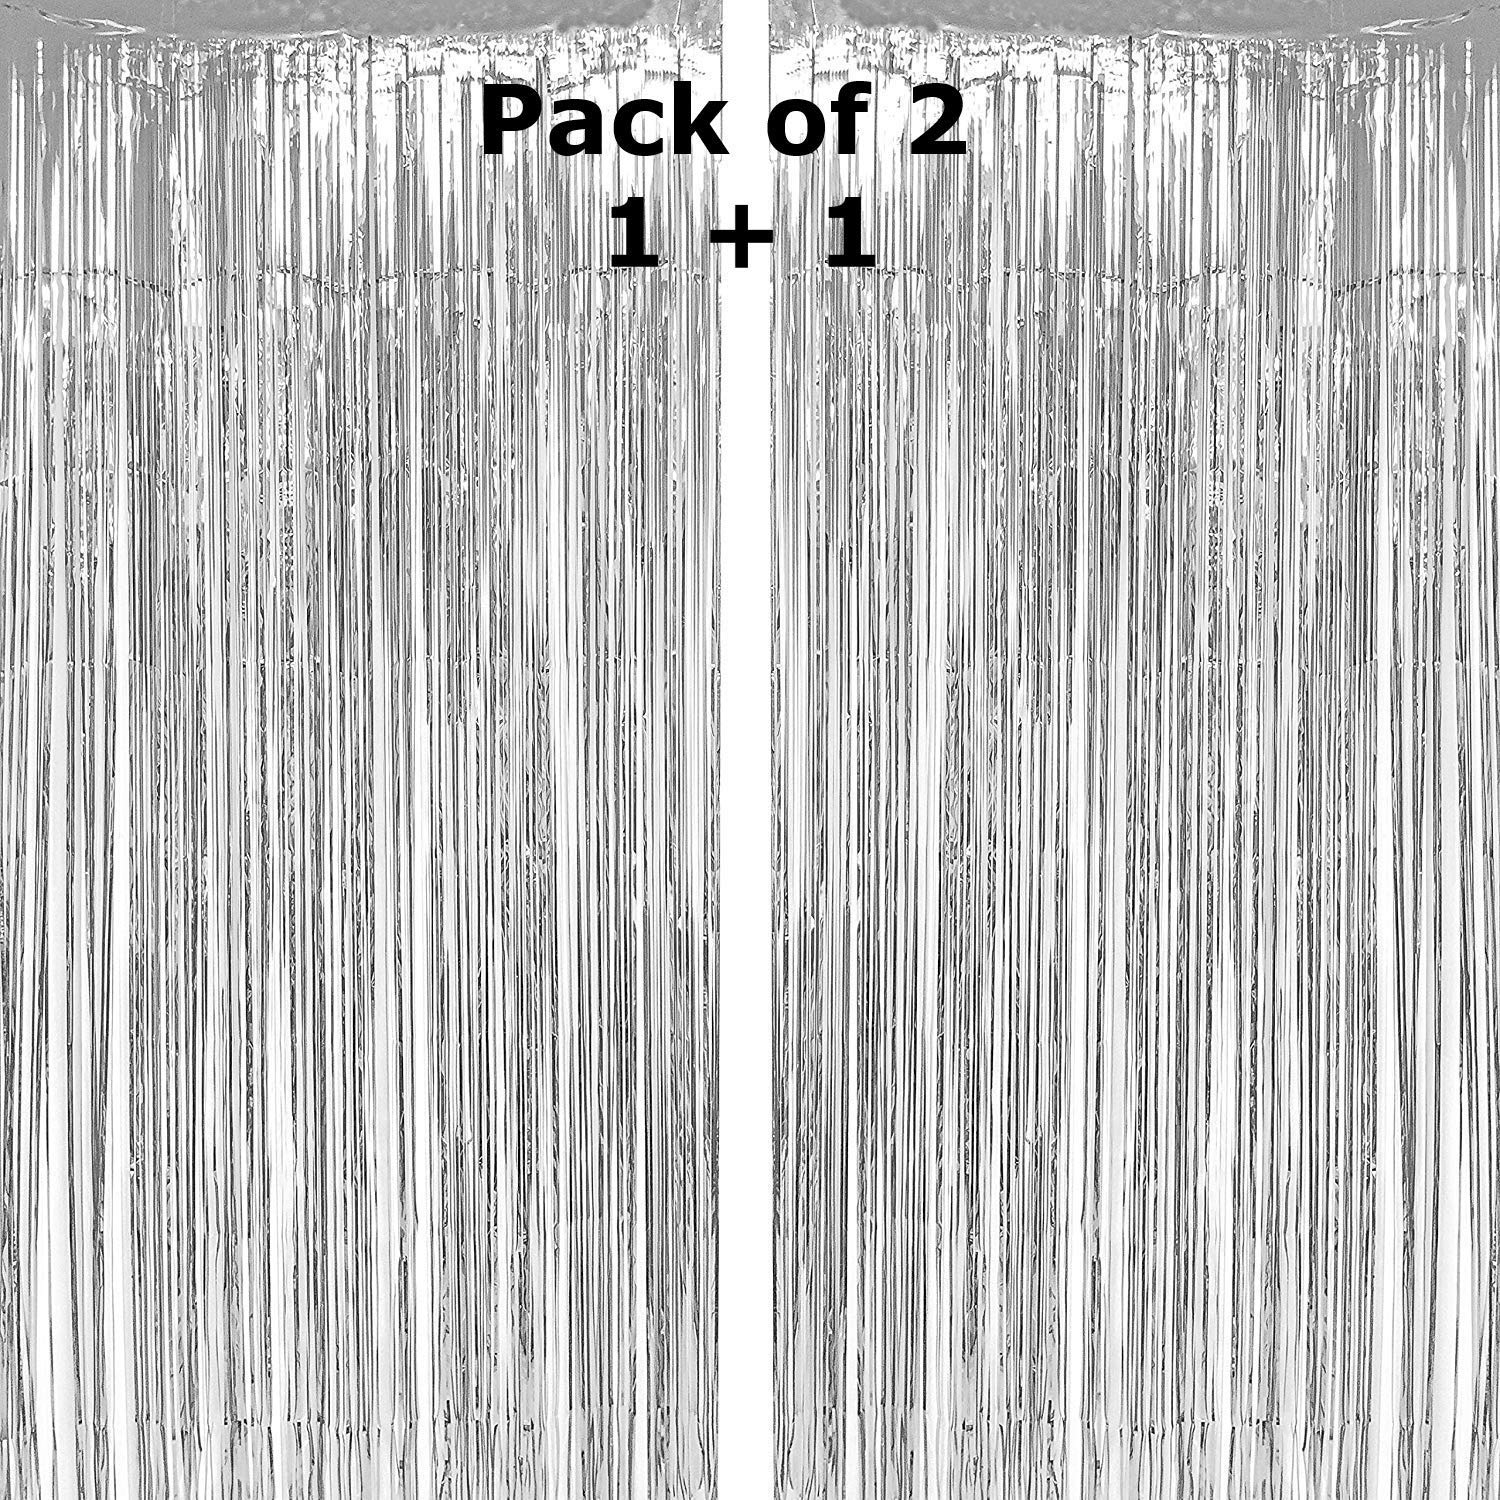 BLODLE Silver Fringe Foil Curtains, 2 Pack Silver Backdrop Foil Curtains, Metallic Backdrop Streamer for Baby Shower, Party Birthday - (Pack of 2 Pcs)